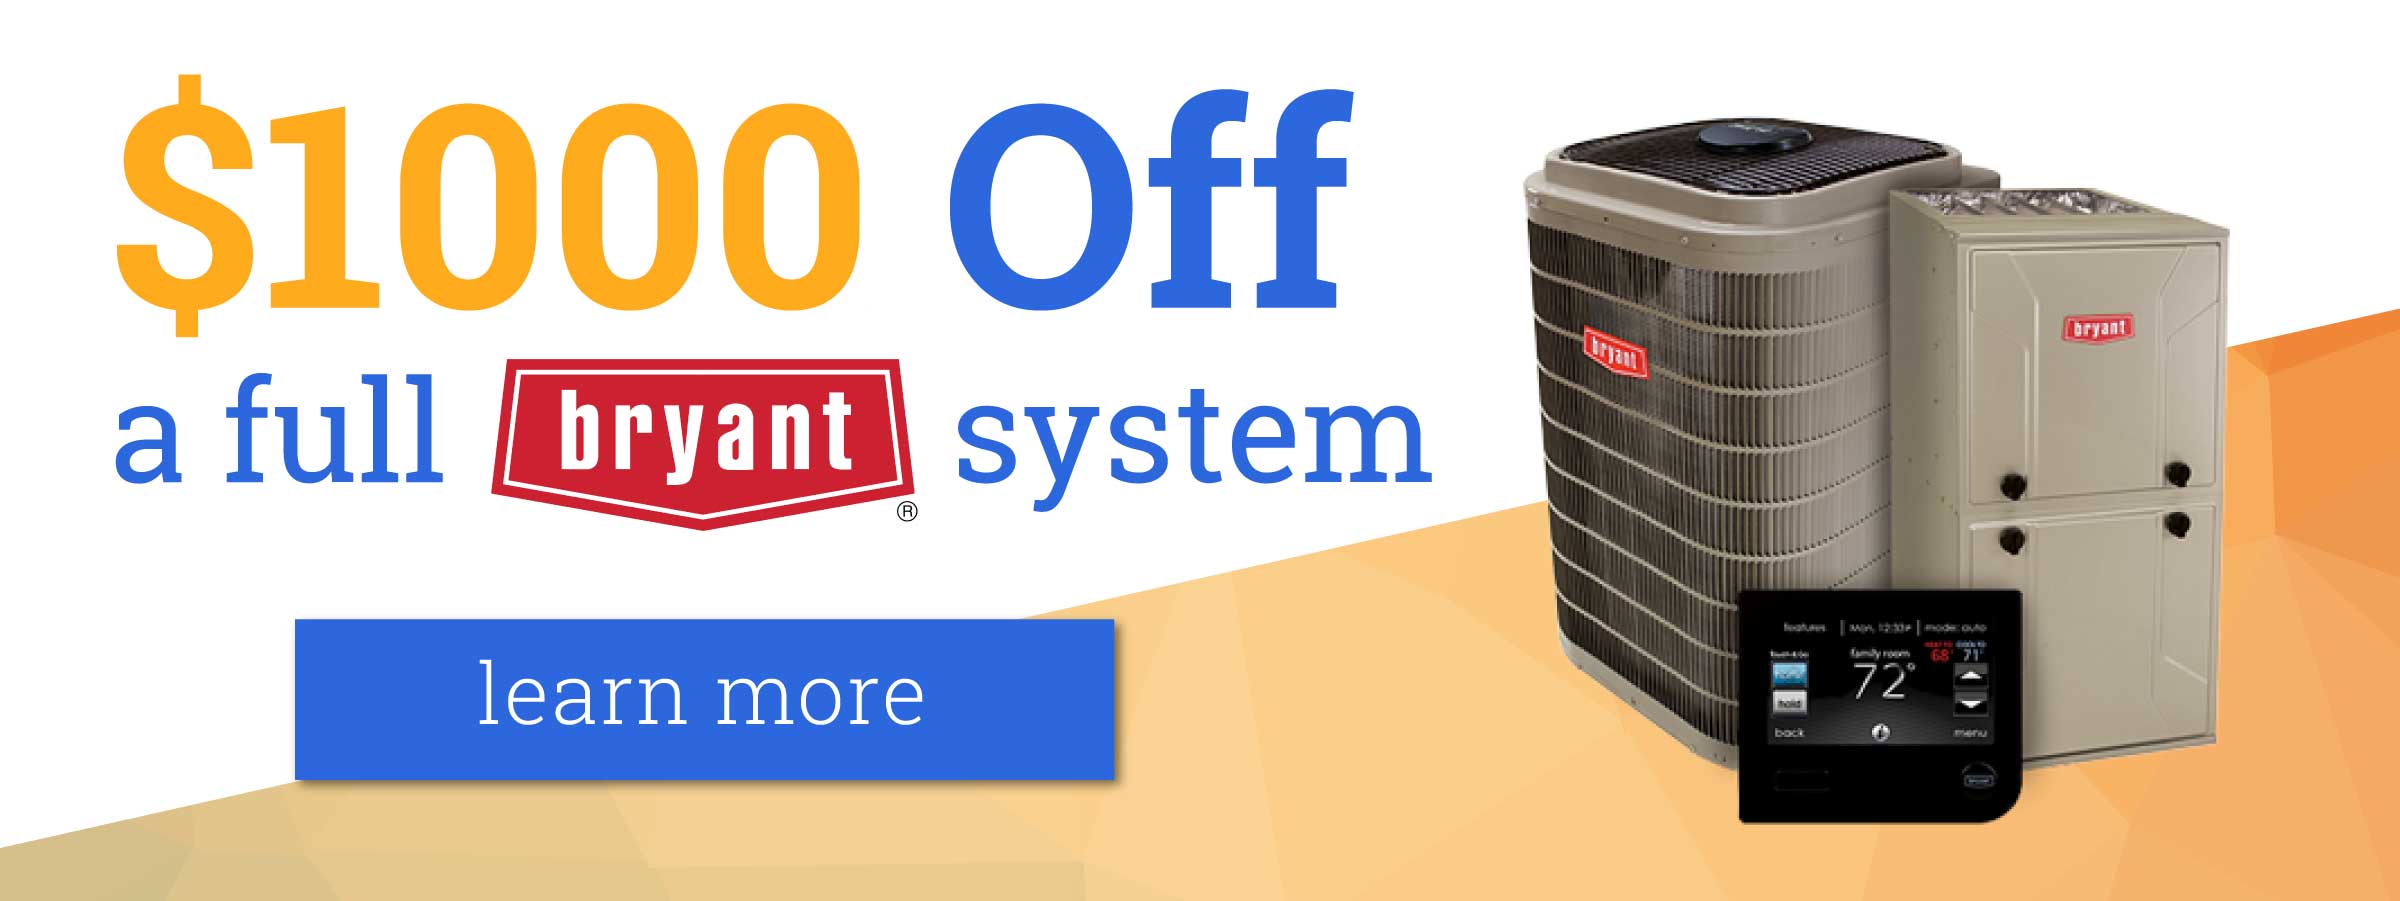 Get $1000 OFF a new Bryant System! Call today for more information!